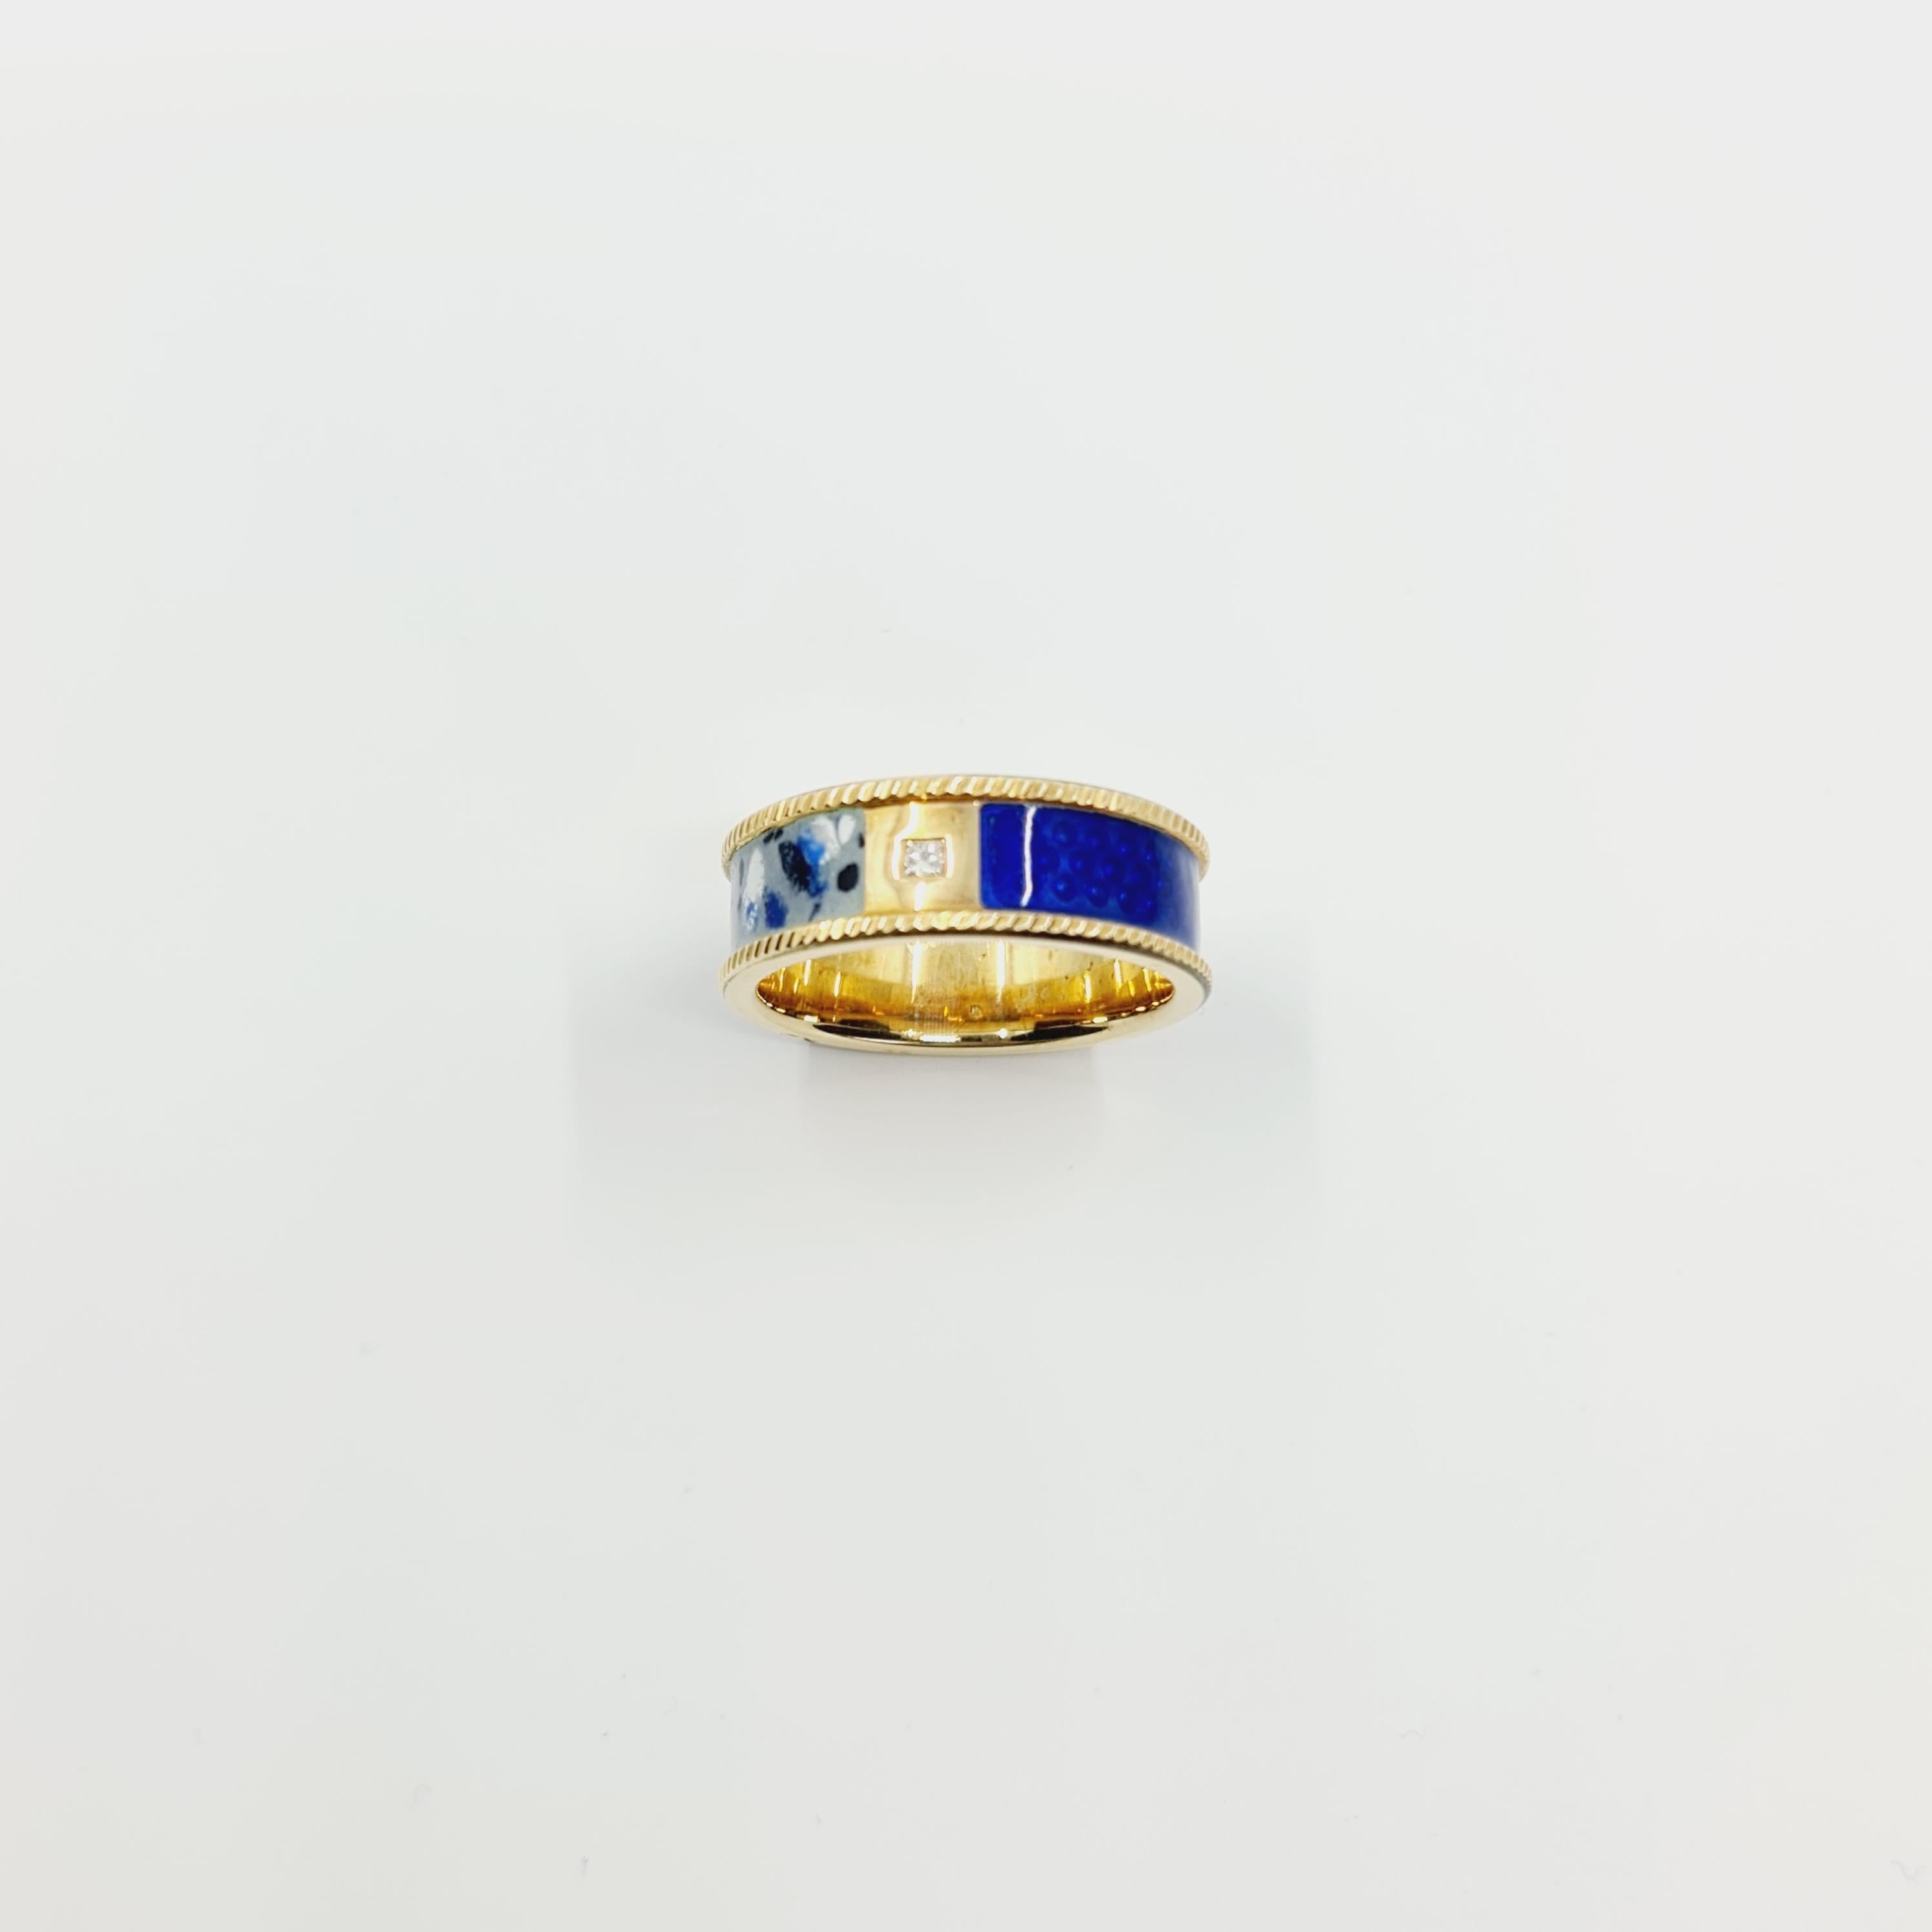 0.05 Carat Diamond Ring G/IF 14k White Gold, Blue/Grey/White Enamel 

Solitaire Princess Cut Diamond.
Fine Hand Made Enamel Ring in 14k Gold. 
Width:8mm

4 C`s:
Carat: 0.05ct
Color: G
Clarity: IF
Cut: Very Good
Polish: Very Good
Symmetry: Very